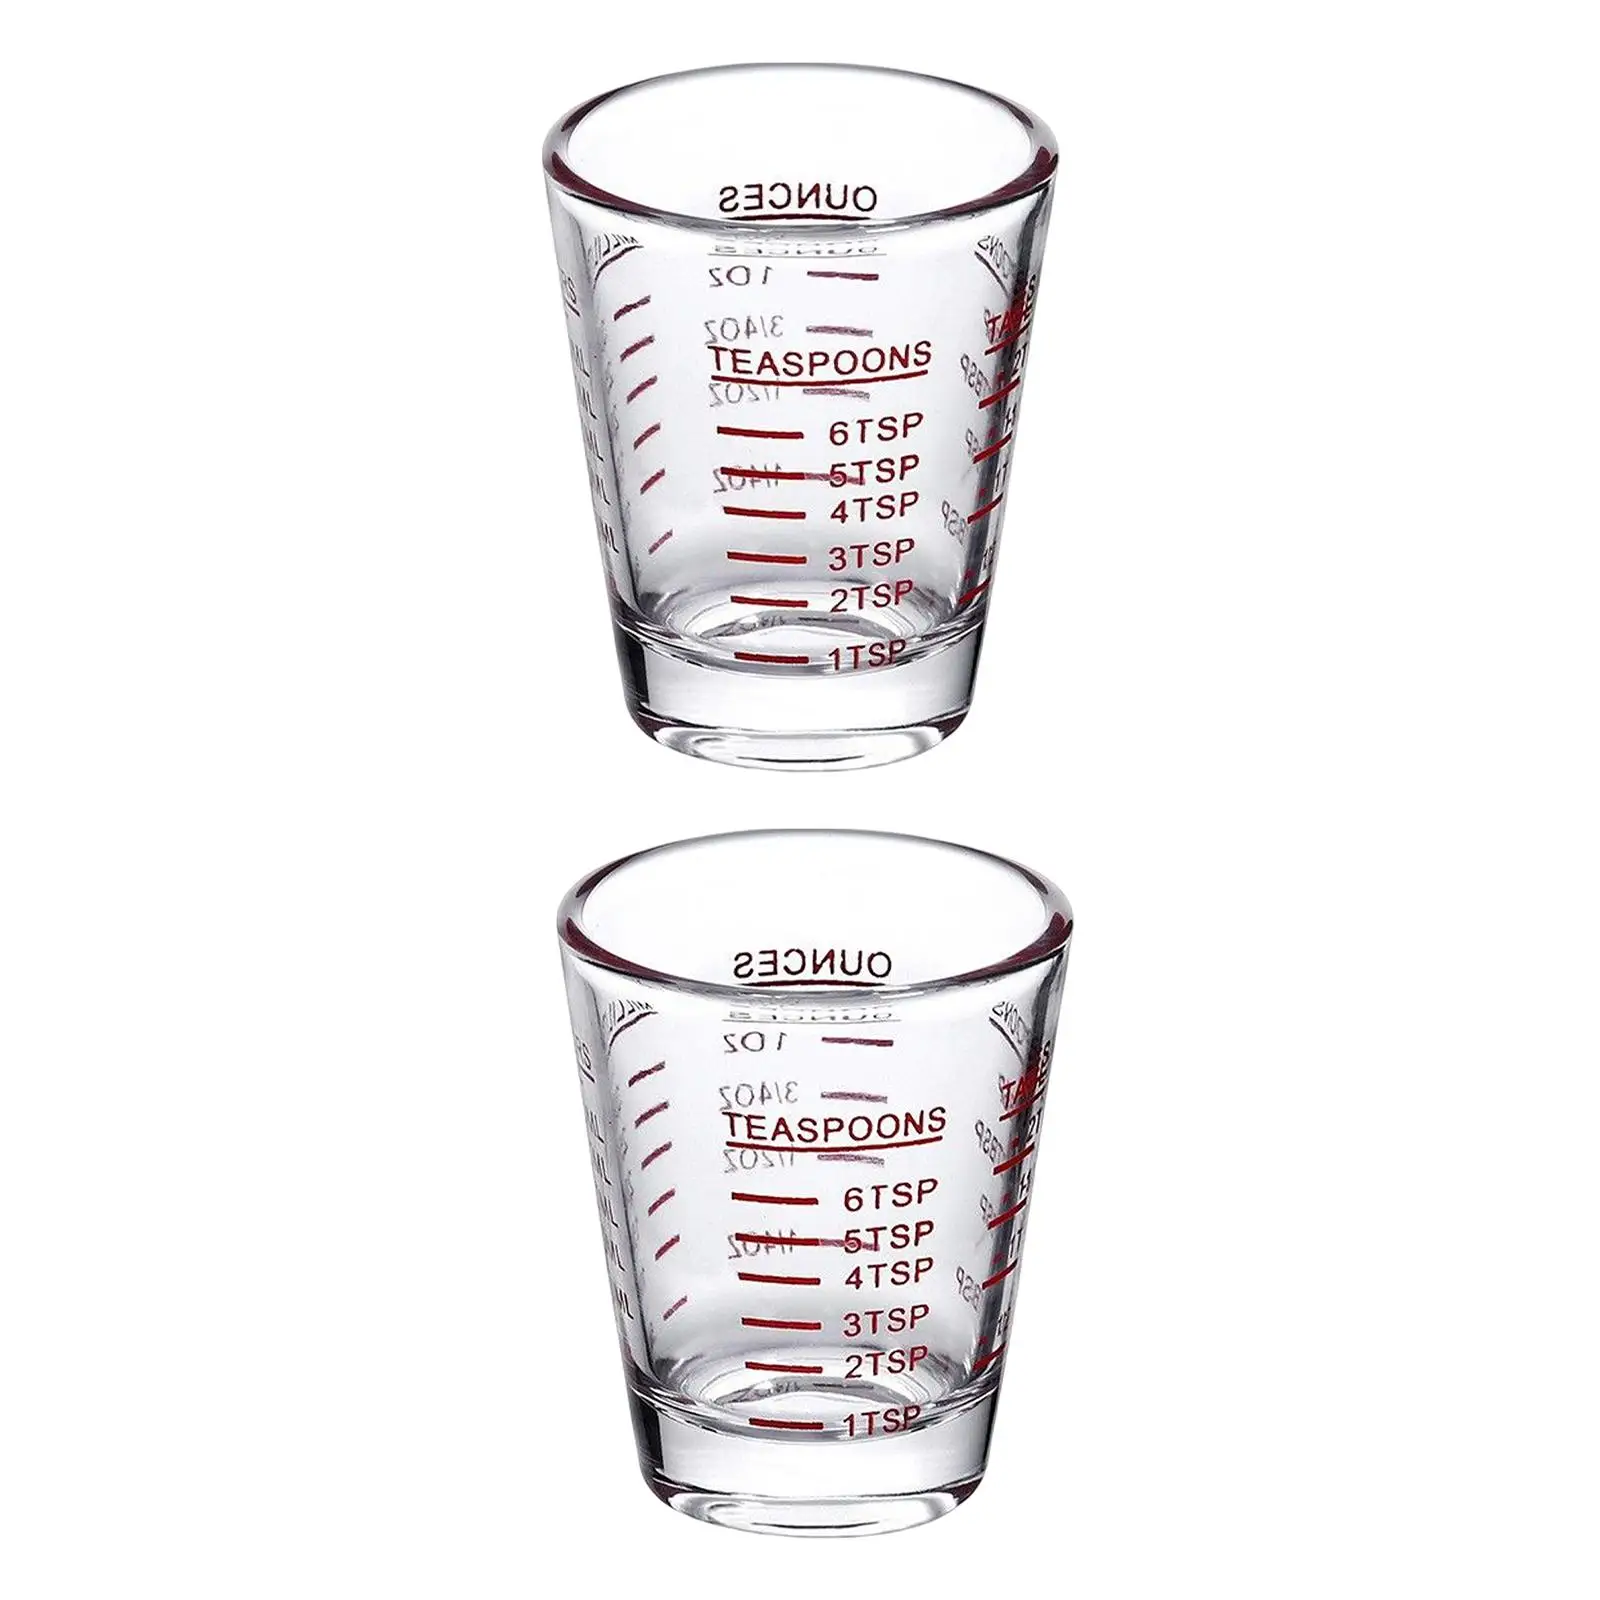 https://ae01.alicdn.com/kf/Sd5786c48b3f04c5499f08b16d9155e01H/2x-Glass-Measuring-Cup-Mini-Measure-Heavy-Glass-Shot-Glasses-Measuring-Cup-for-Home-Cafe.jpg